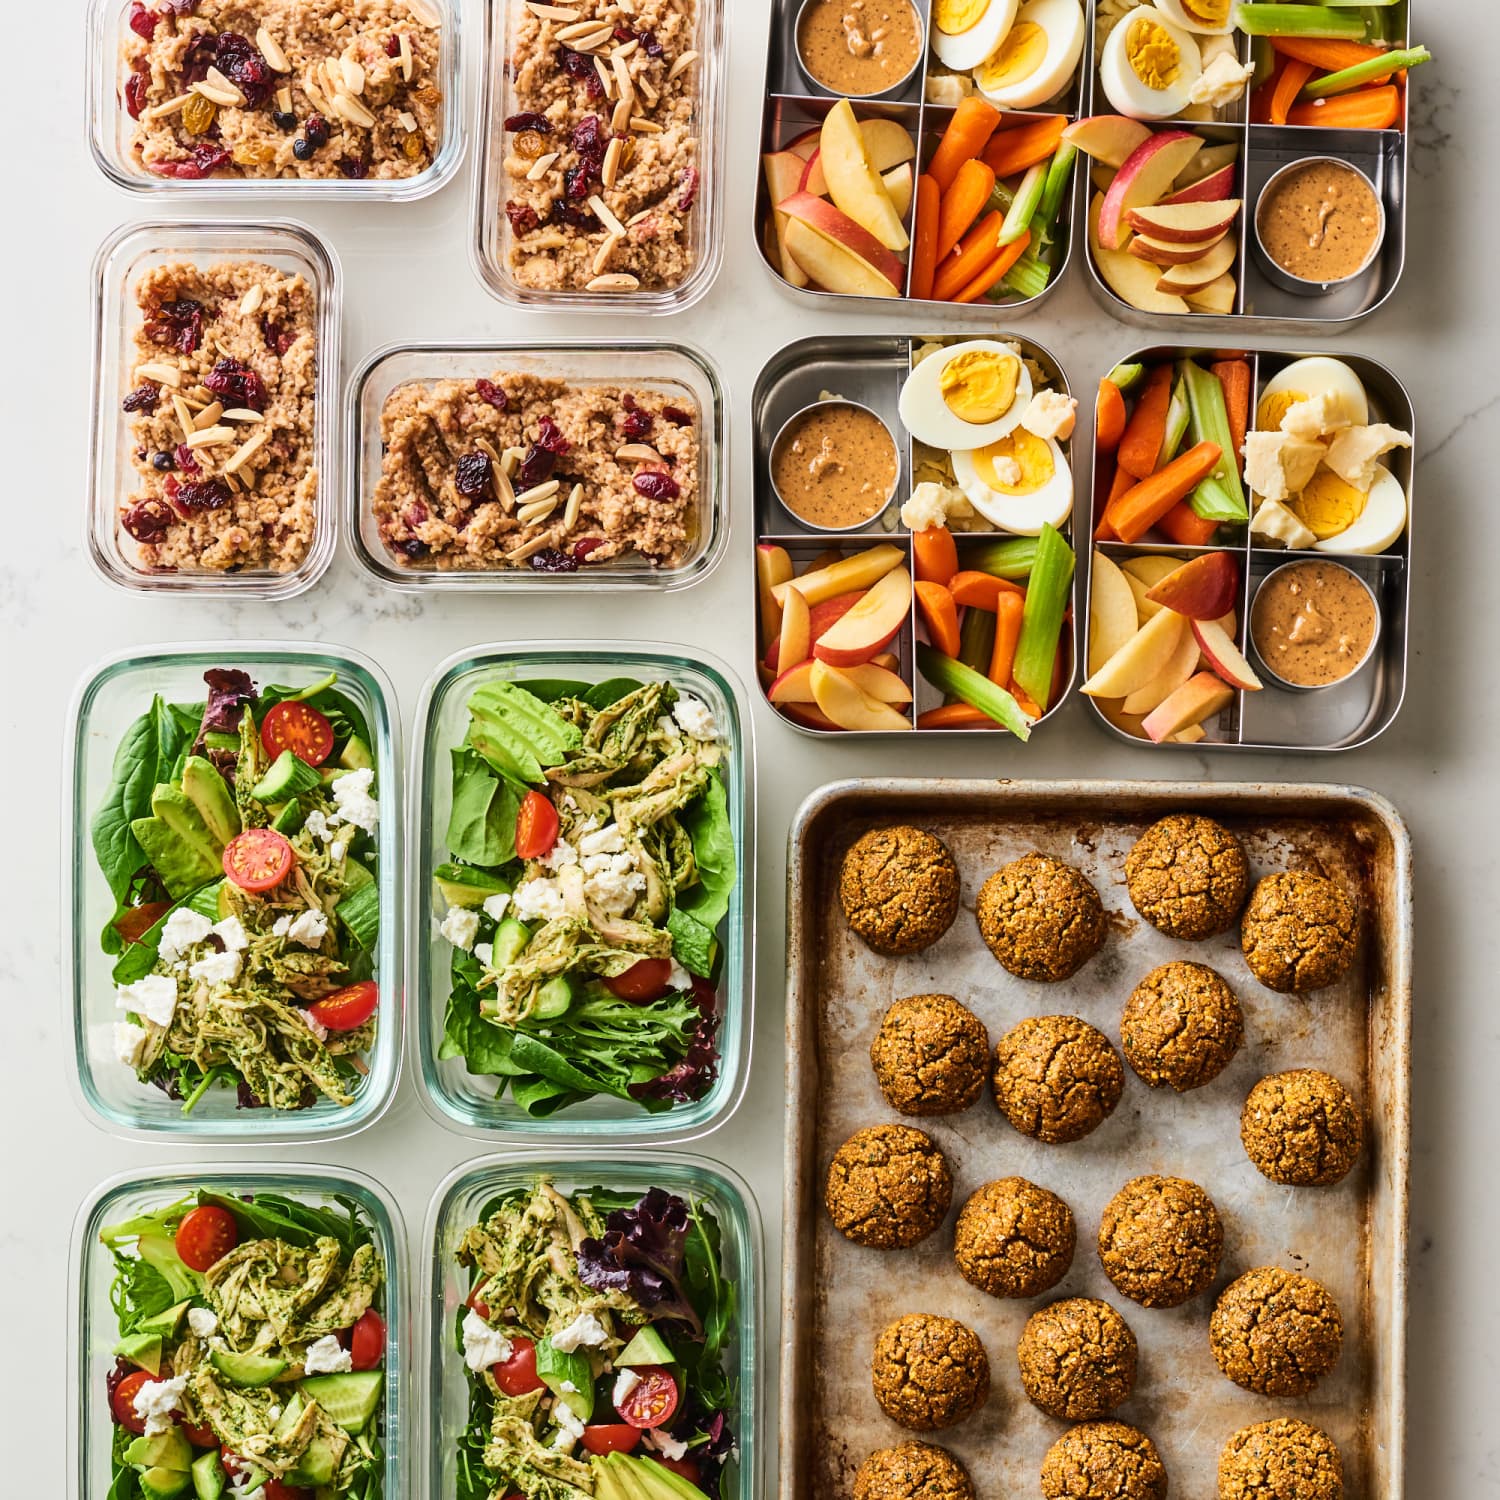 Meal Prep Plan: How I Prep a Week of Meals for One in Just Over an